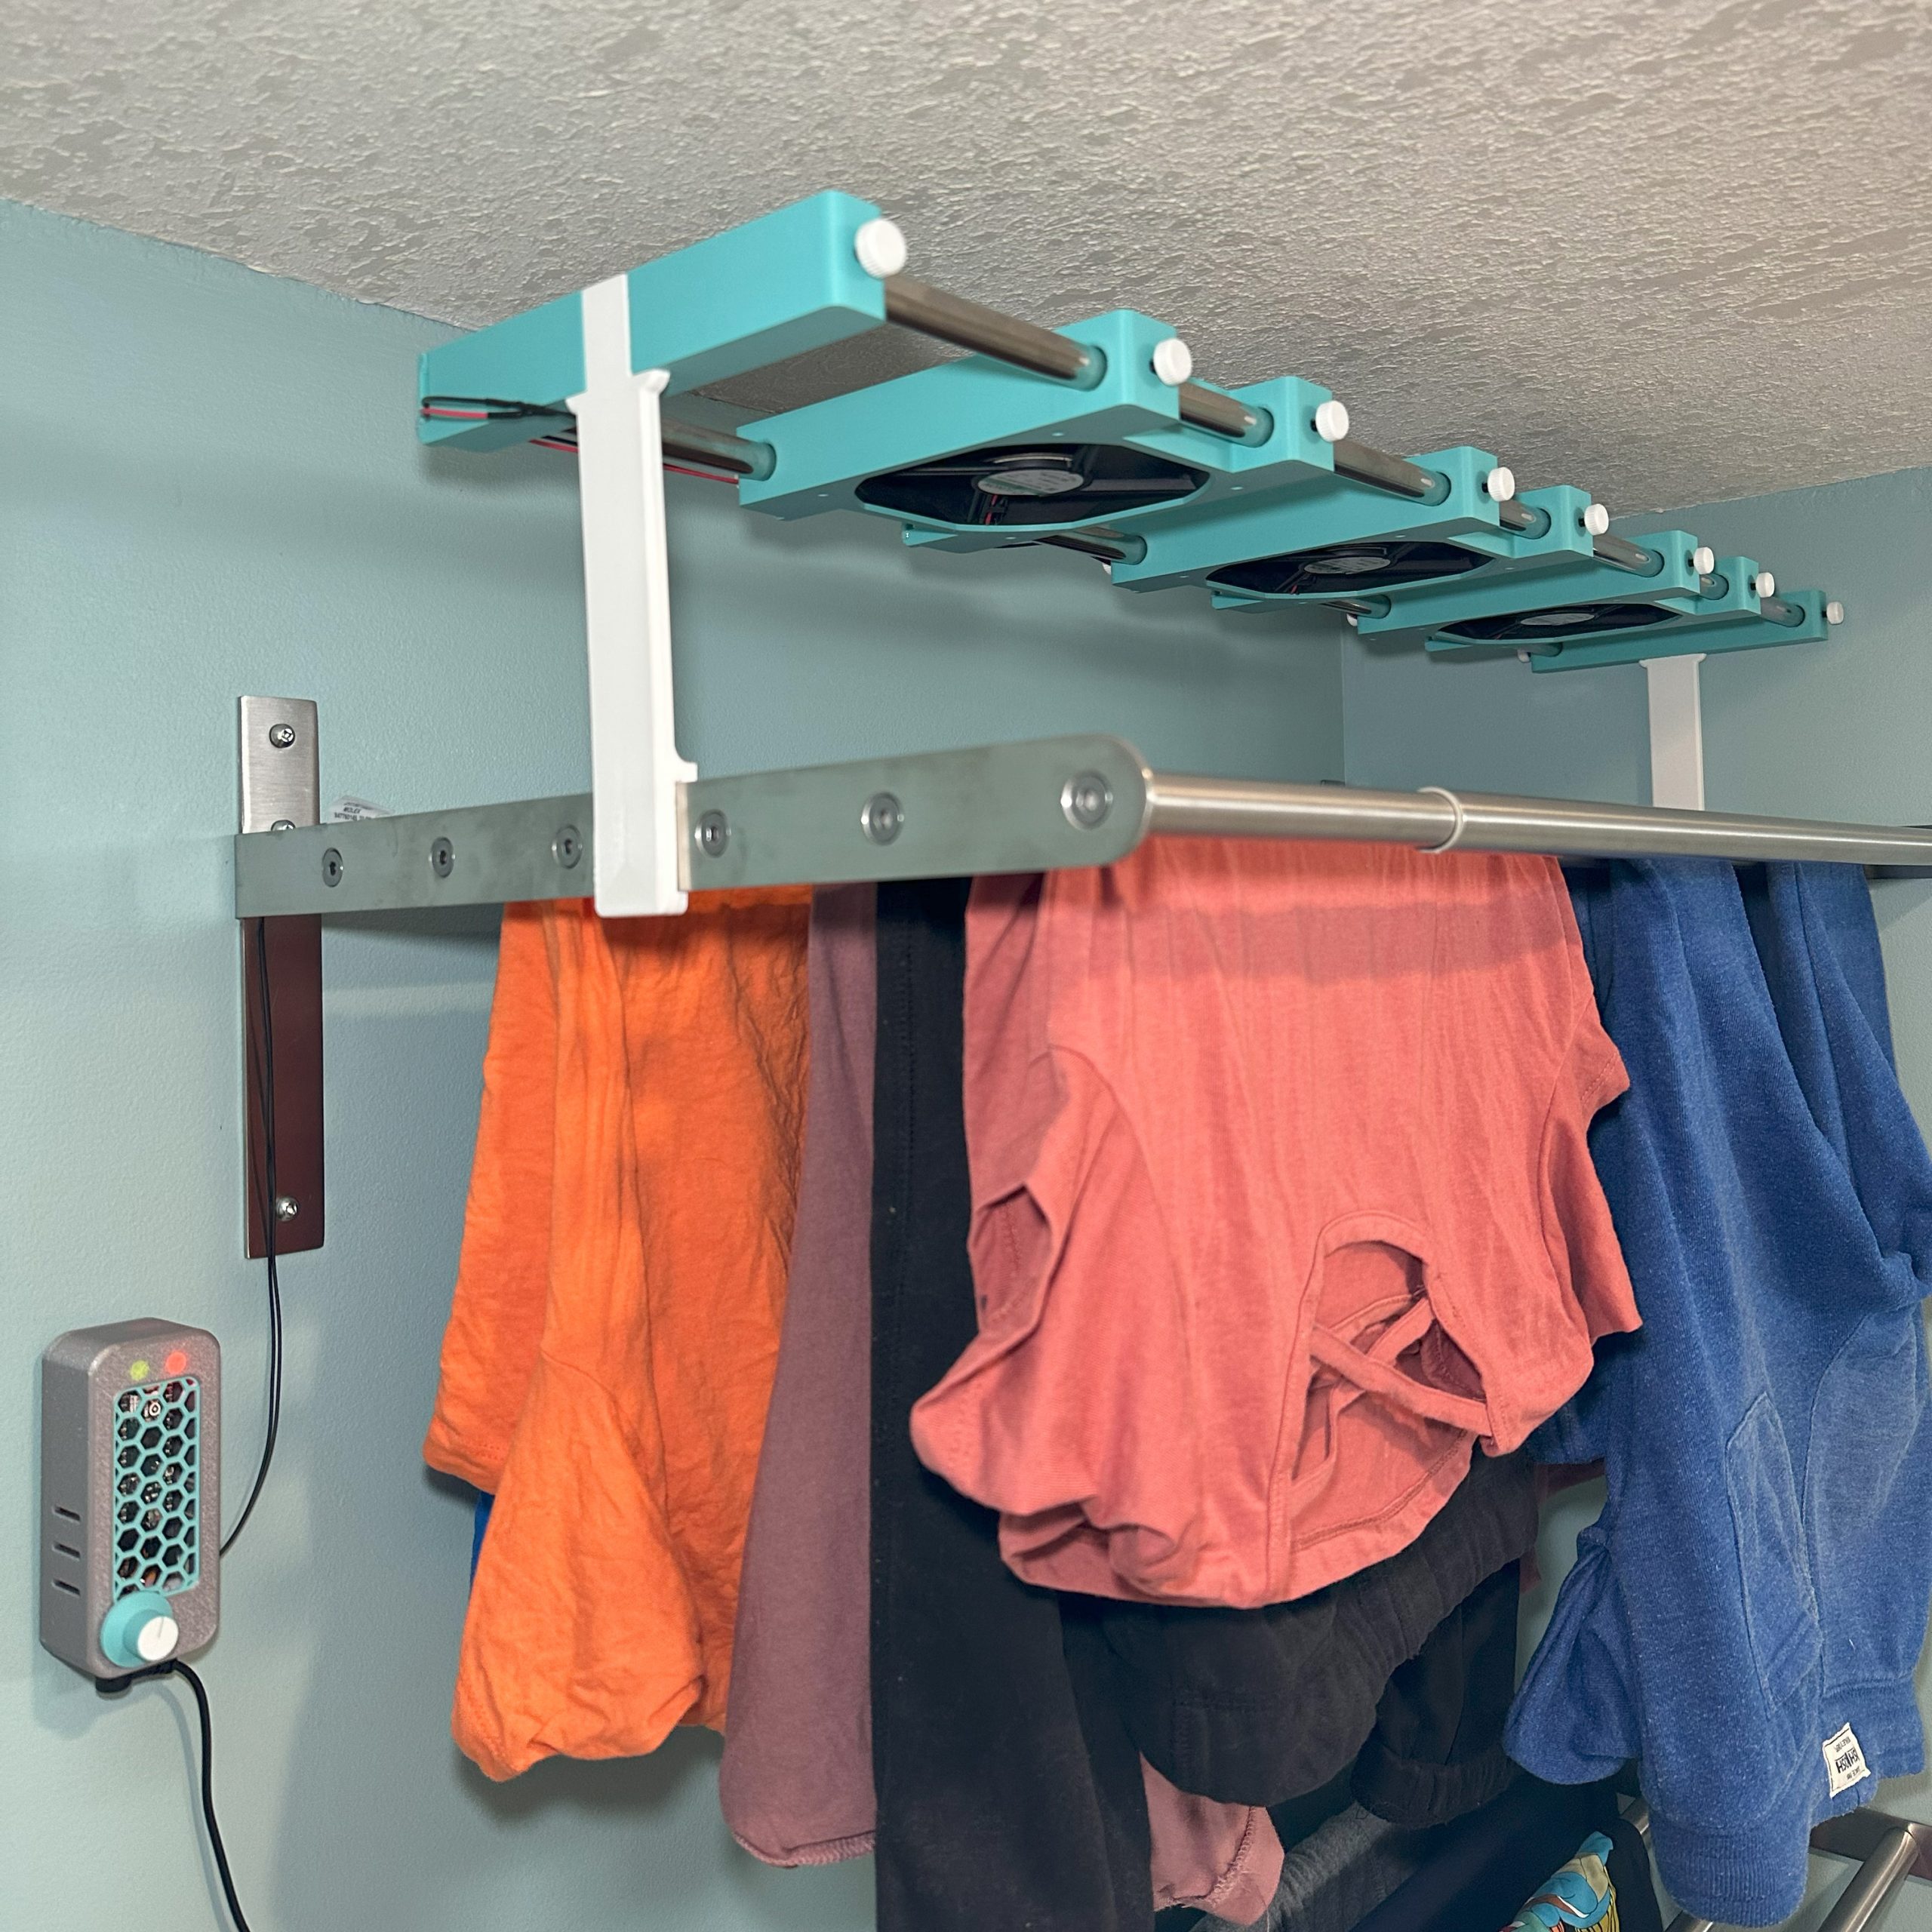 Arduino Fan Controller (to Dry Laundry)